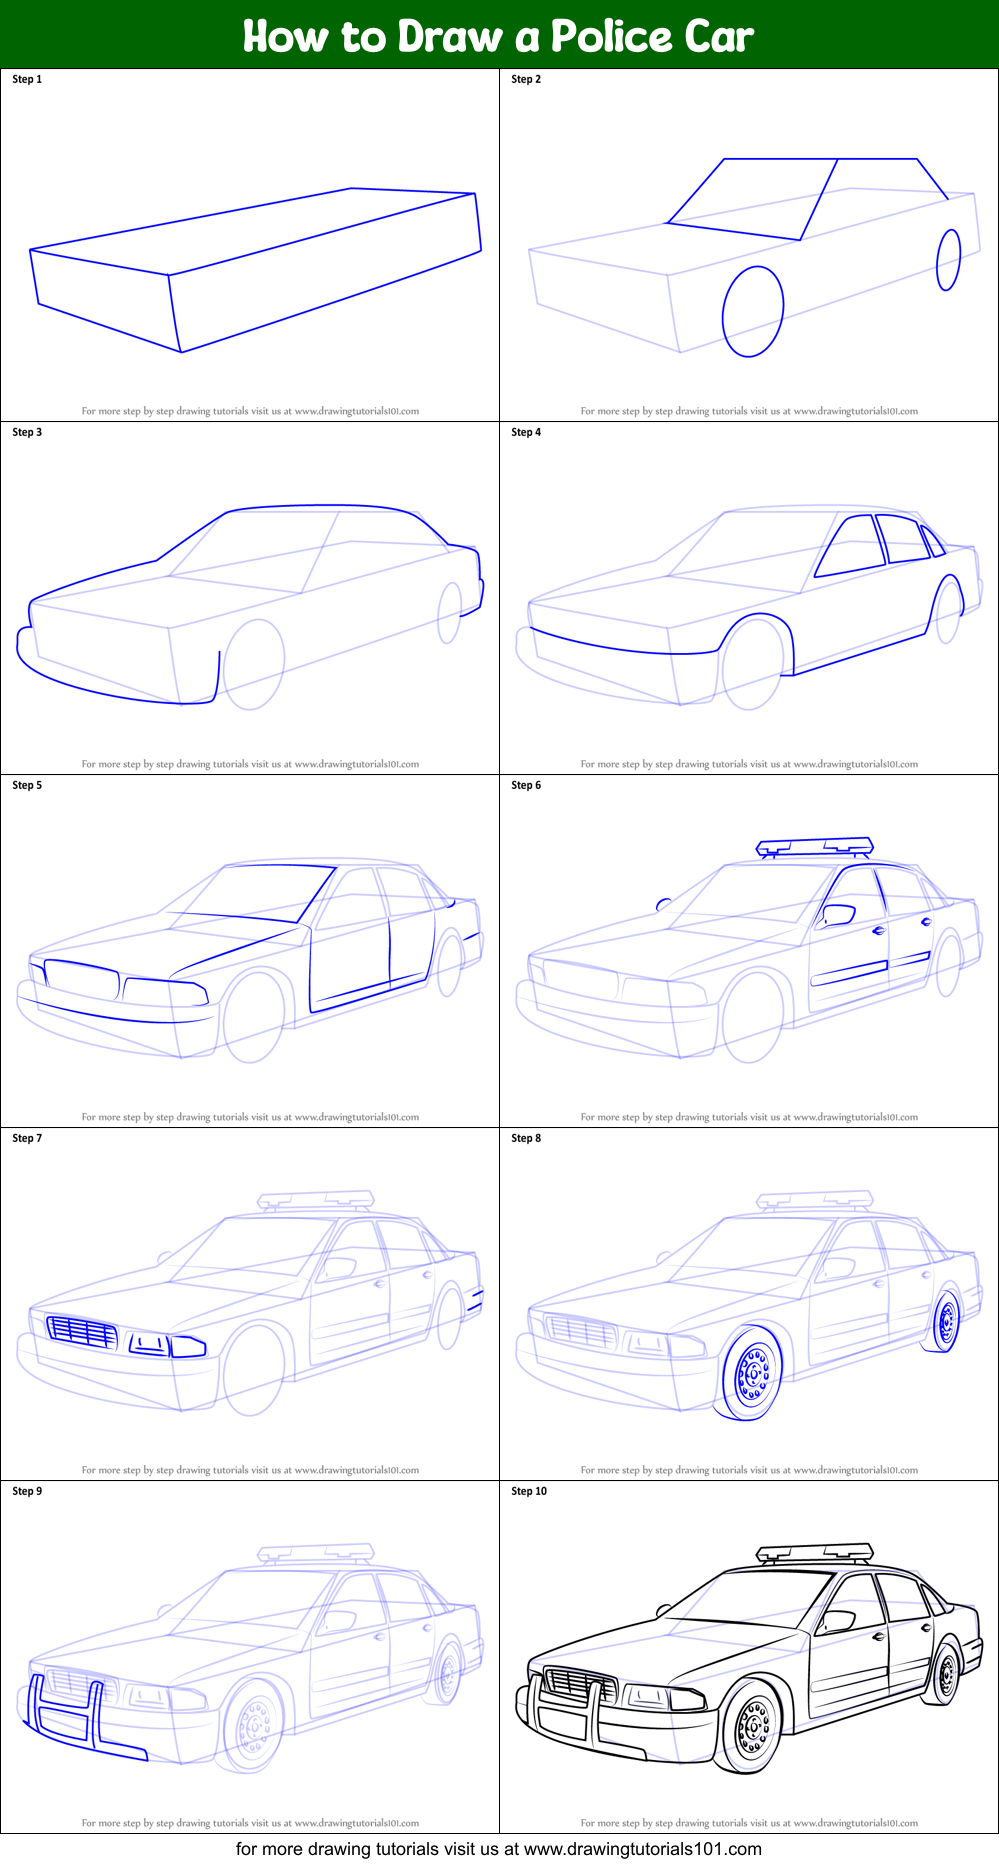 How to Draw a Police Car printable step by step drawing sheet